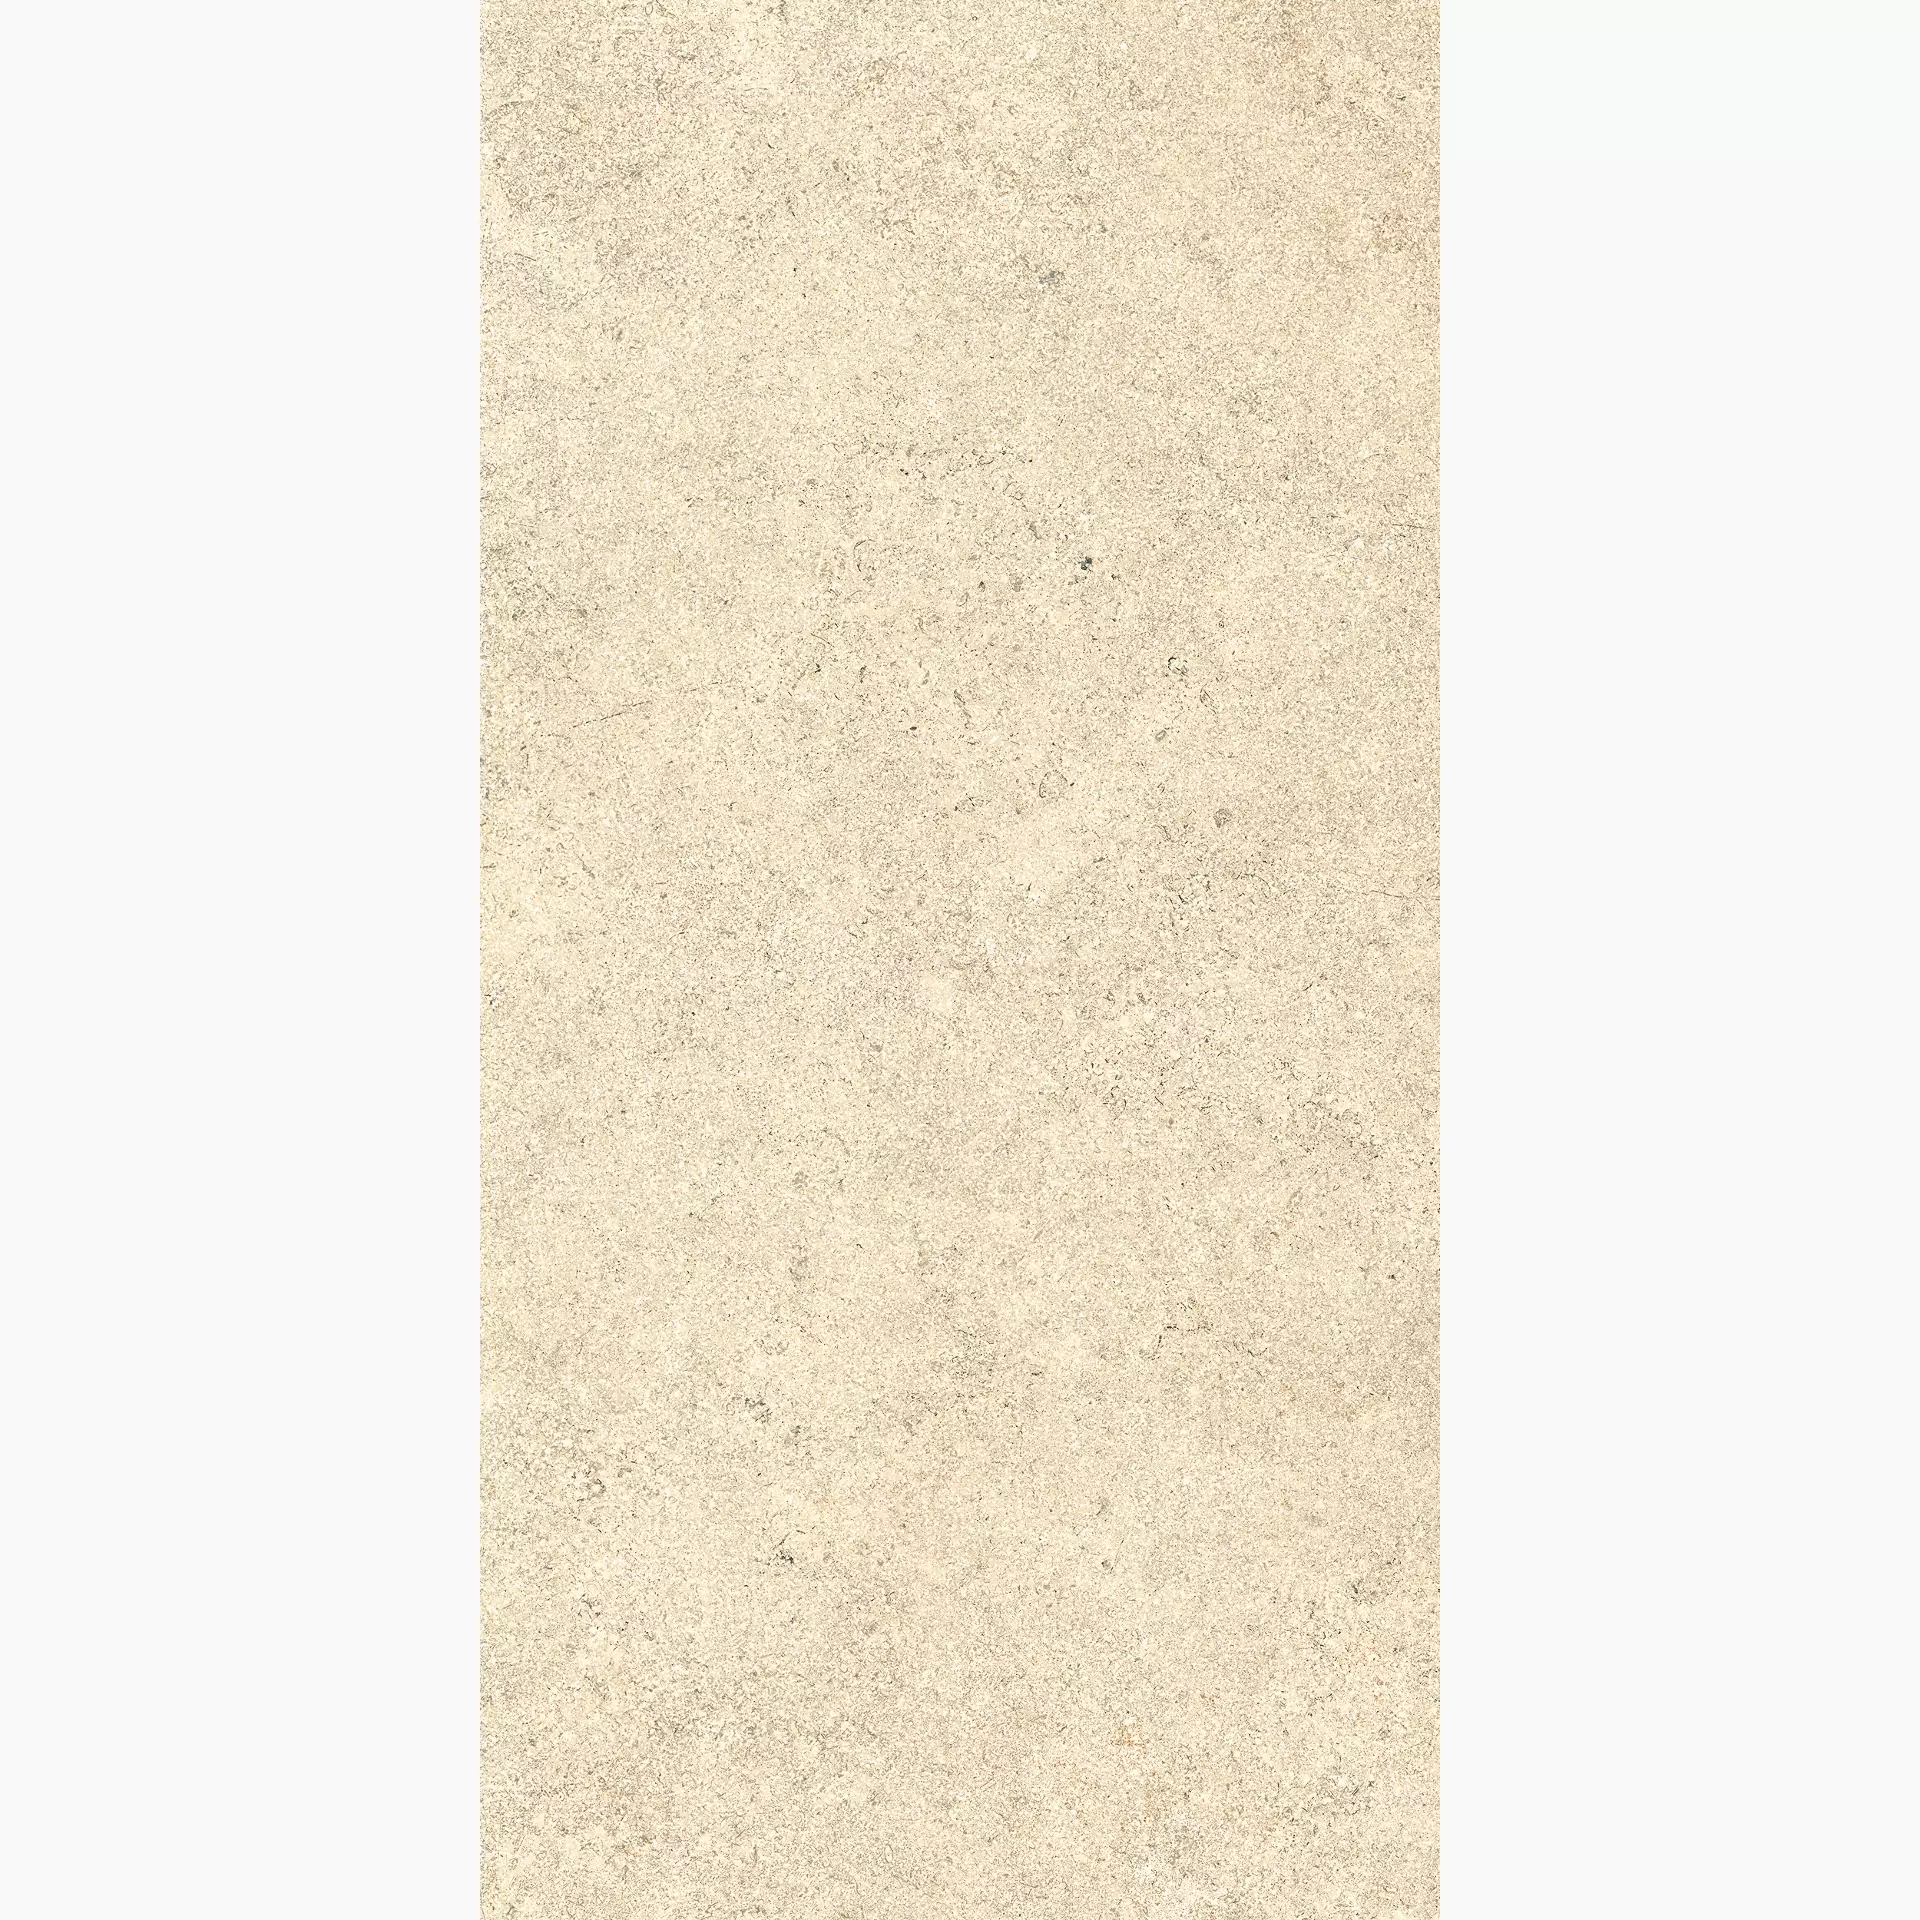 Cottodeste Pura Ivory Rolled Protect EG-PR15 30x60cm rectified 14mm